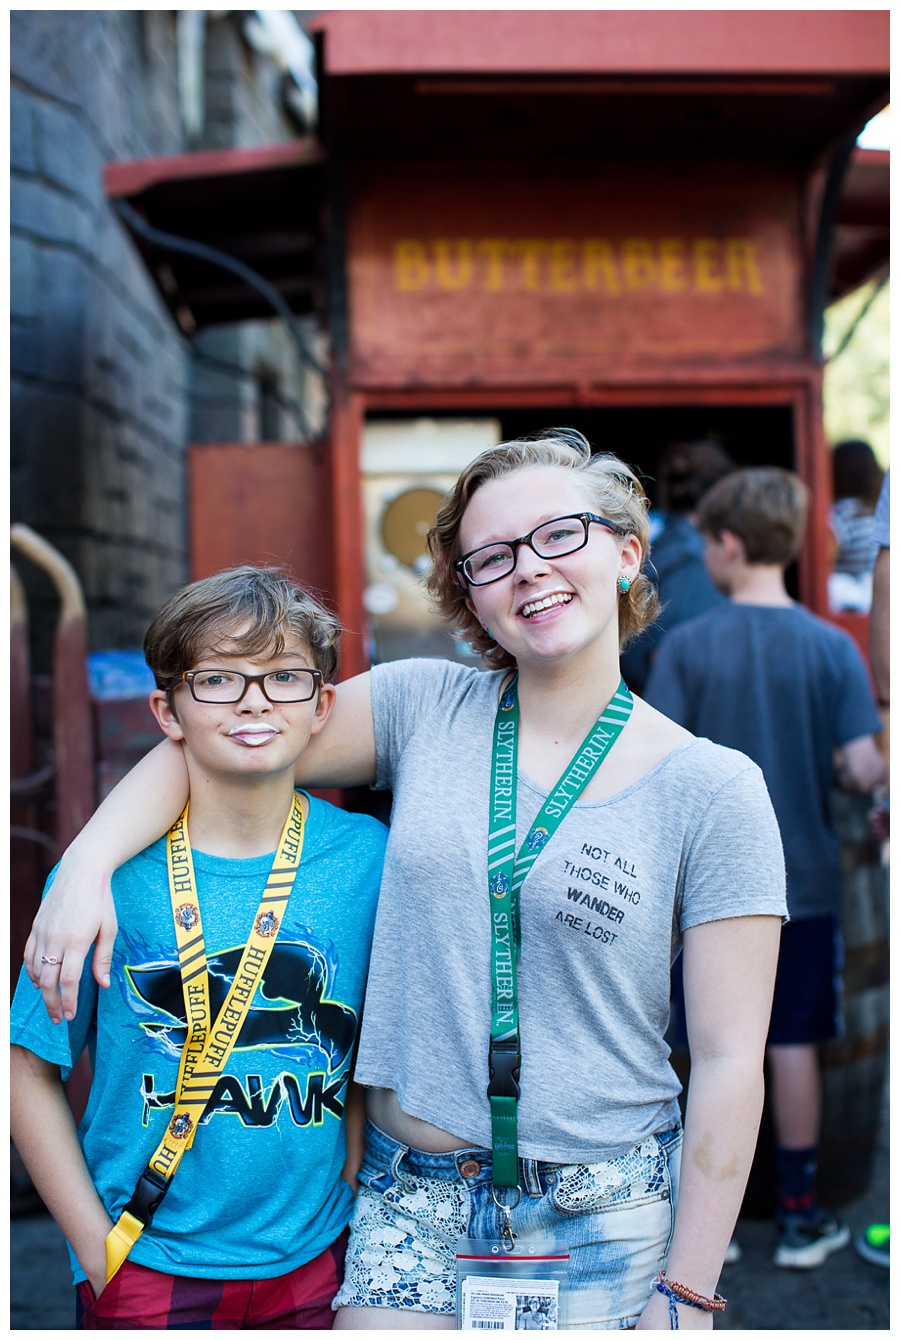 Our Awesome Spring Break at Universal Studios in Orlando Florida!